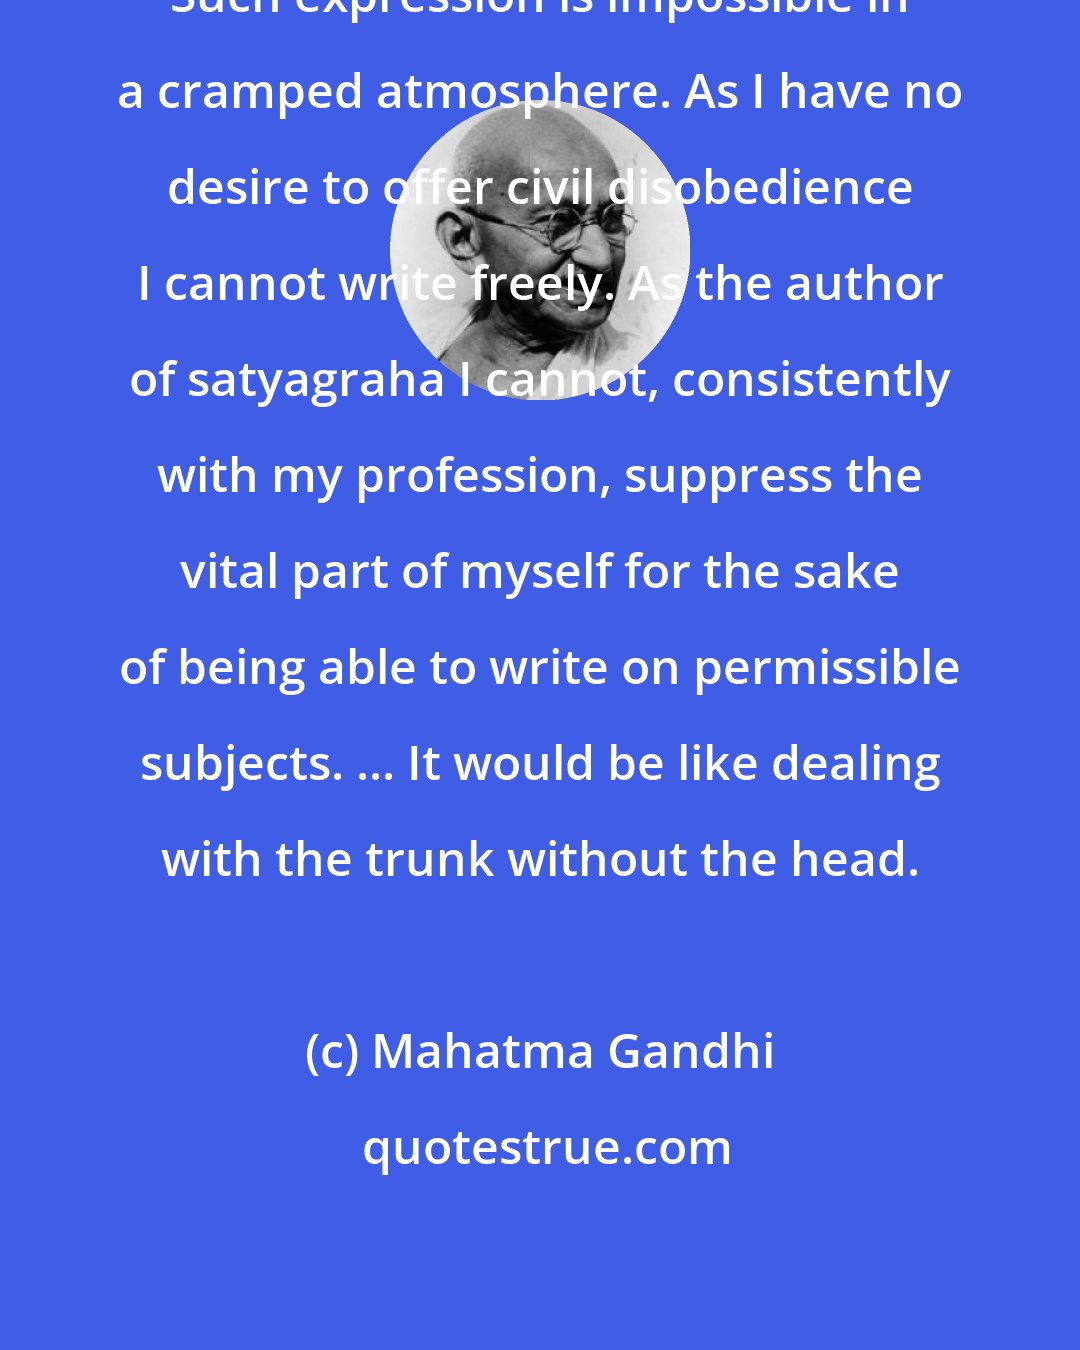 Mahatma Gandhi: Such expression is impossible in a cramped atmosphere. As I have no desire to offer civil disobedience I cannot write freely. As the author of satyagraha I cannot, consistently with my profession, suppress the vital part of myself for the sake of being able to write on permissible subjects. ... It would be like dealing with the trunk without the head.